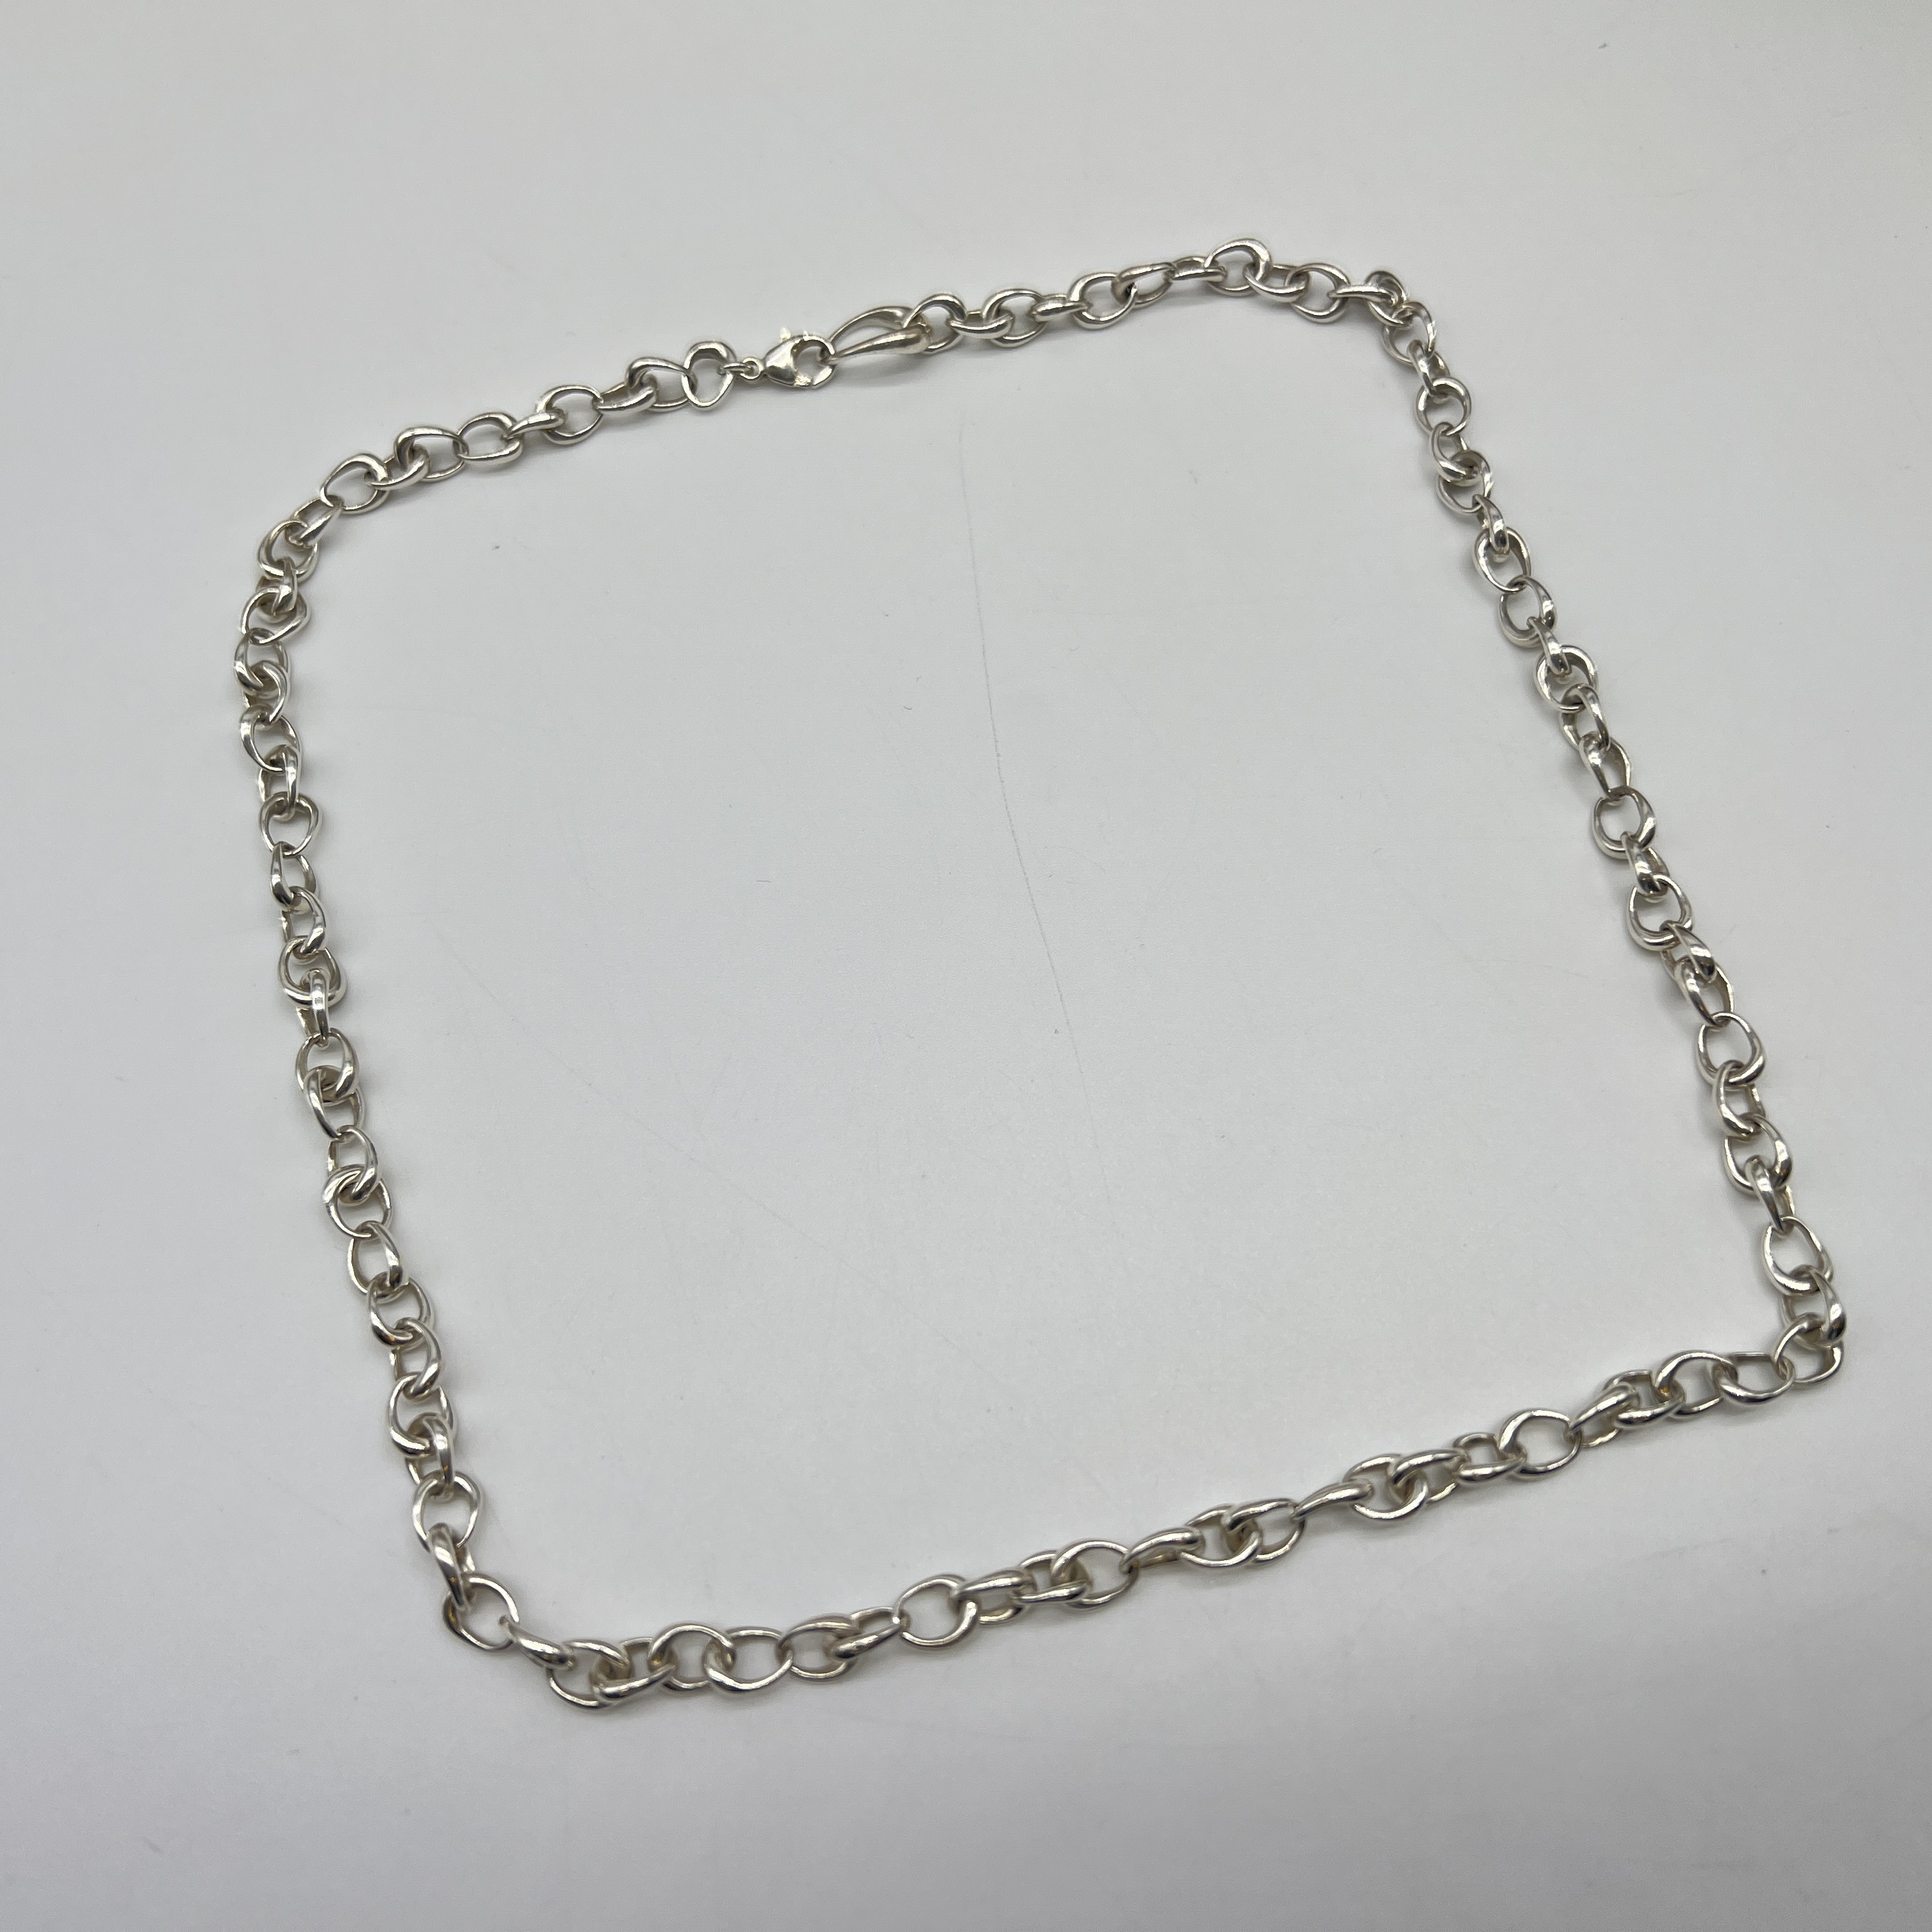 A silver Georg Jensen necklace and bracelet - Image 4 of 7